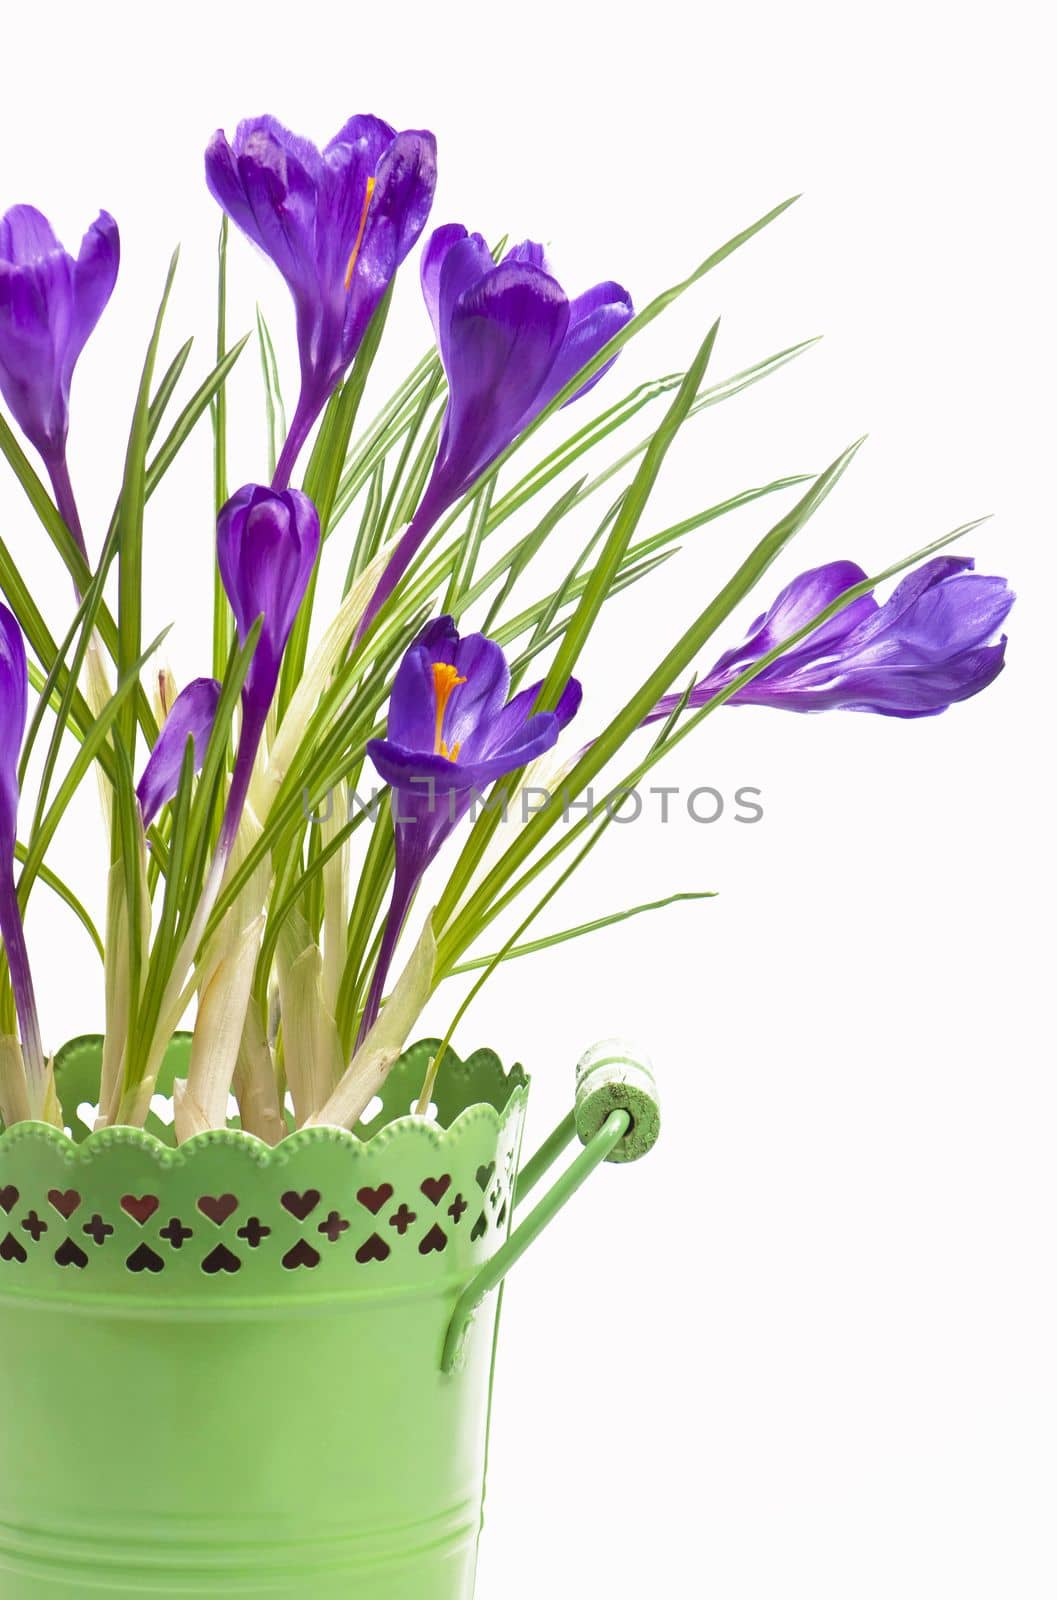 Crocus flower in the spring isolated on white. by aprilphoto